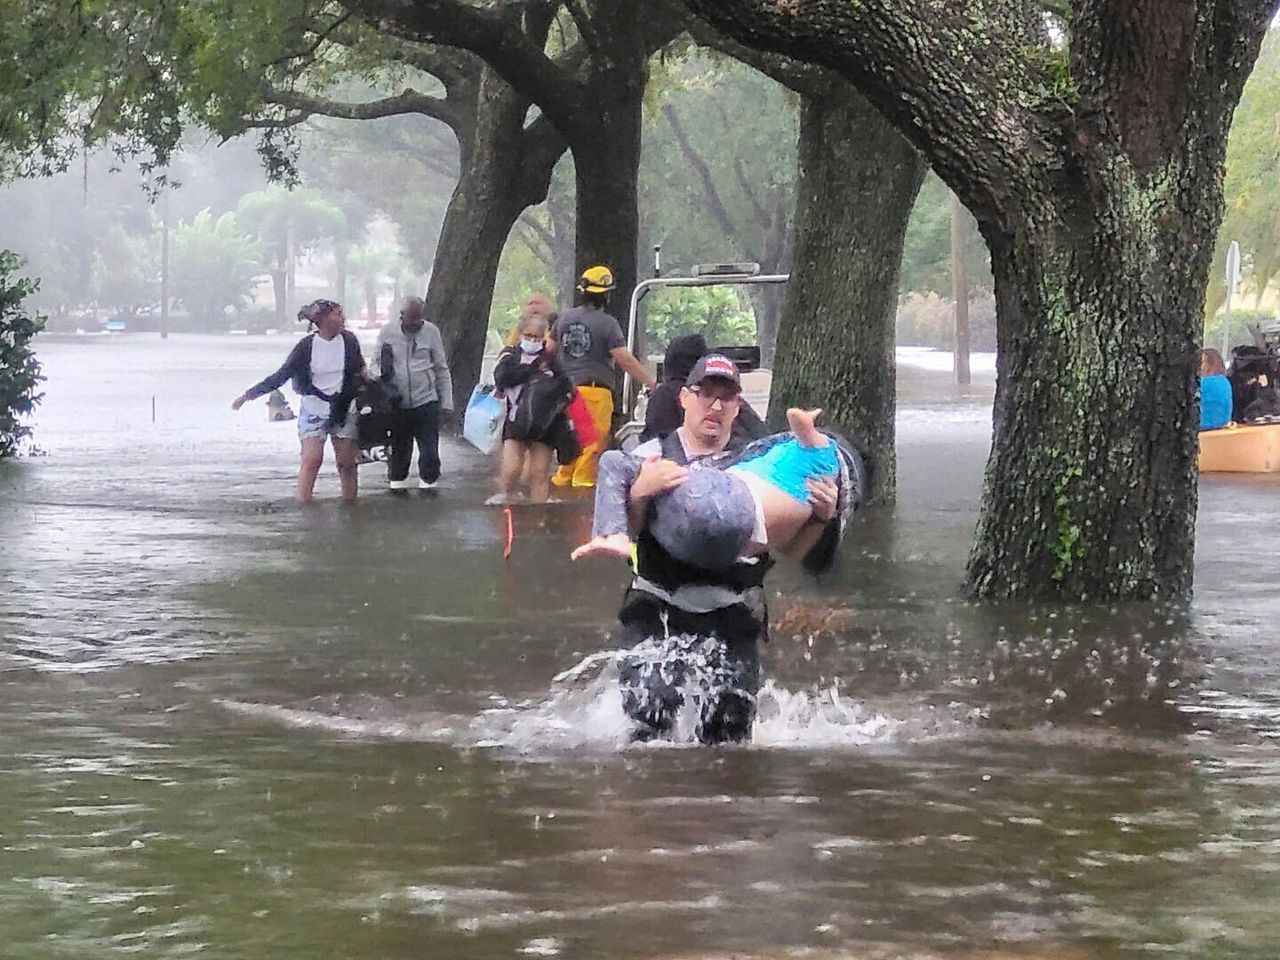 In this photo, provided by the Orange County Fire Rescue Public Information Agency, firefighters help people stranded by Hurricane Ian early Thursday.